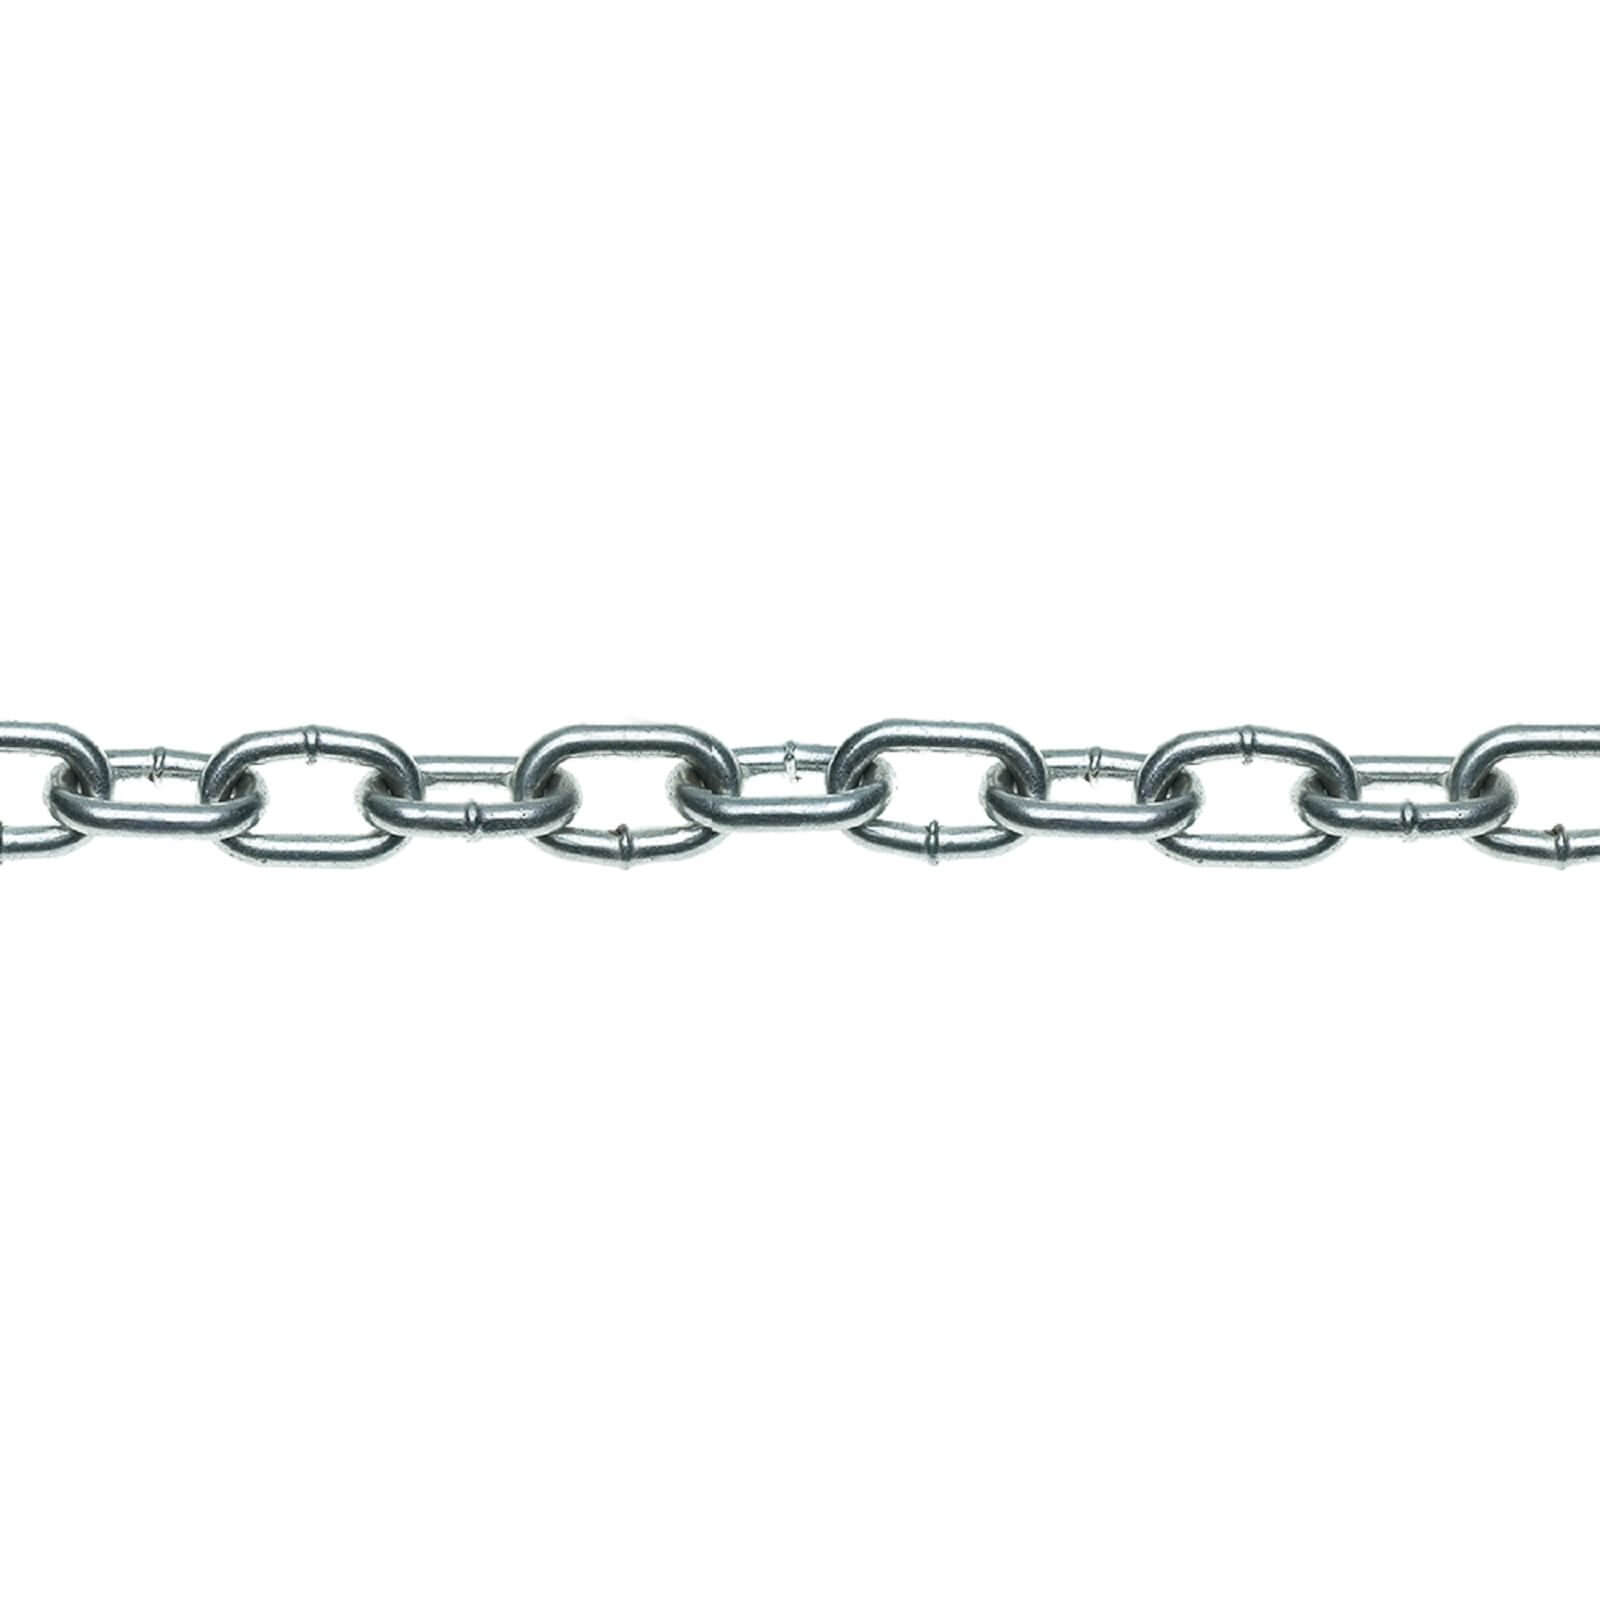 Short Link Chain - Bright Zinc Plated - 2.5mm